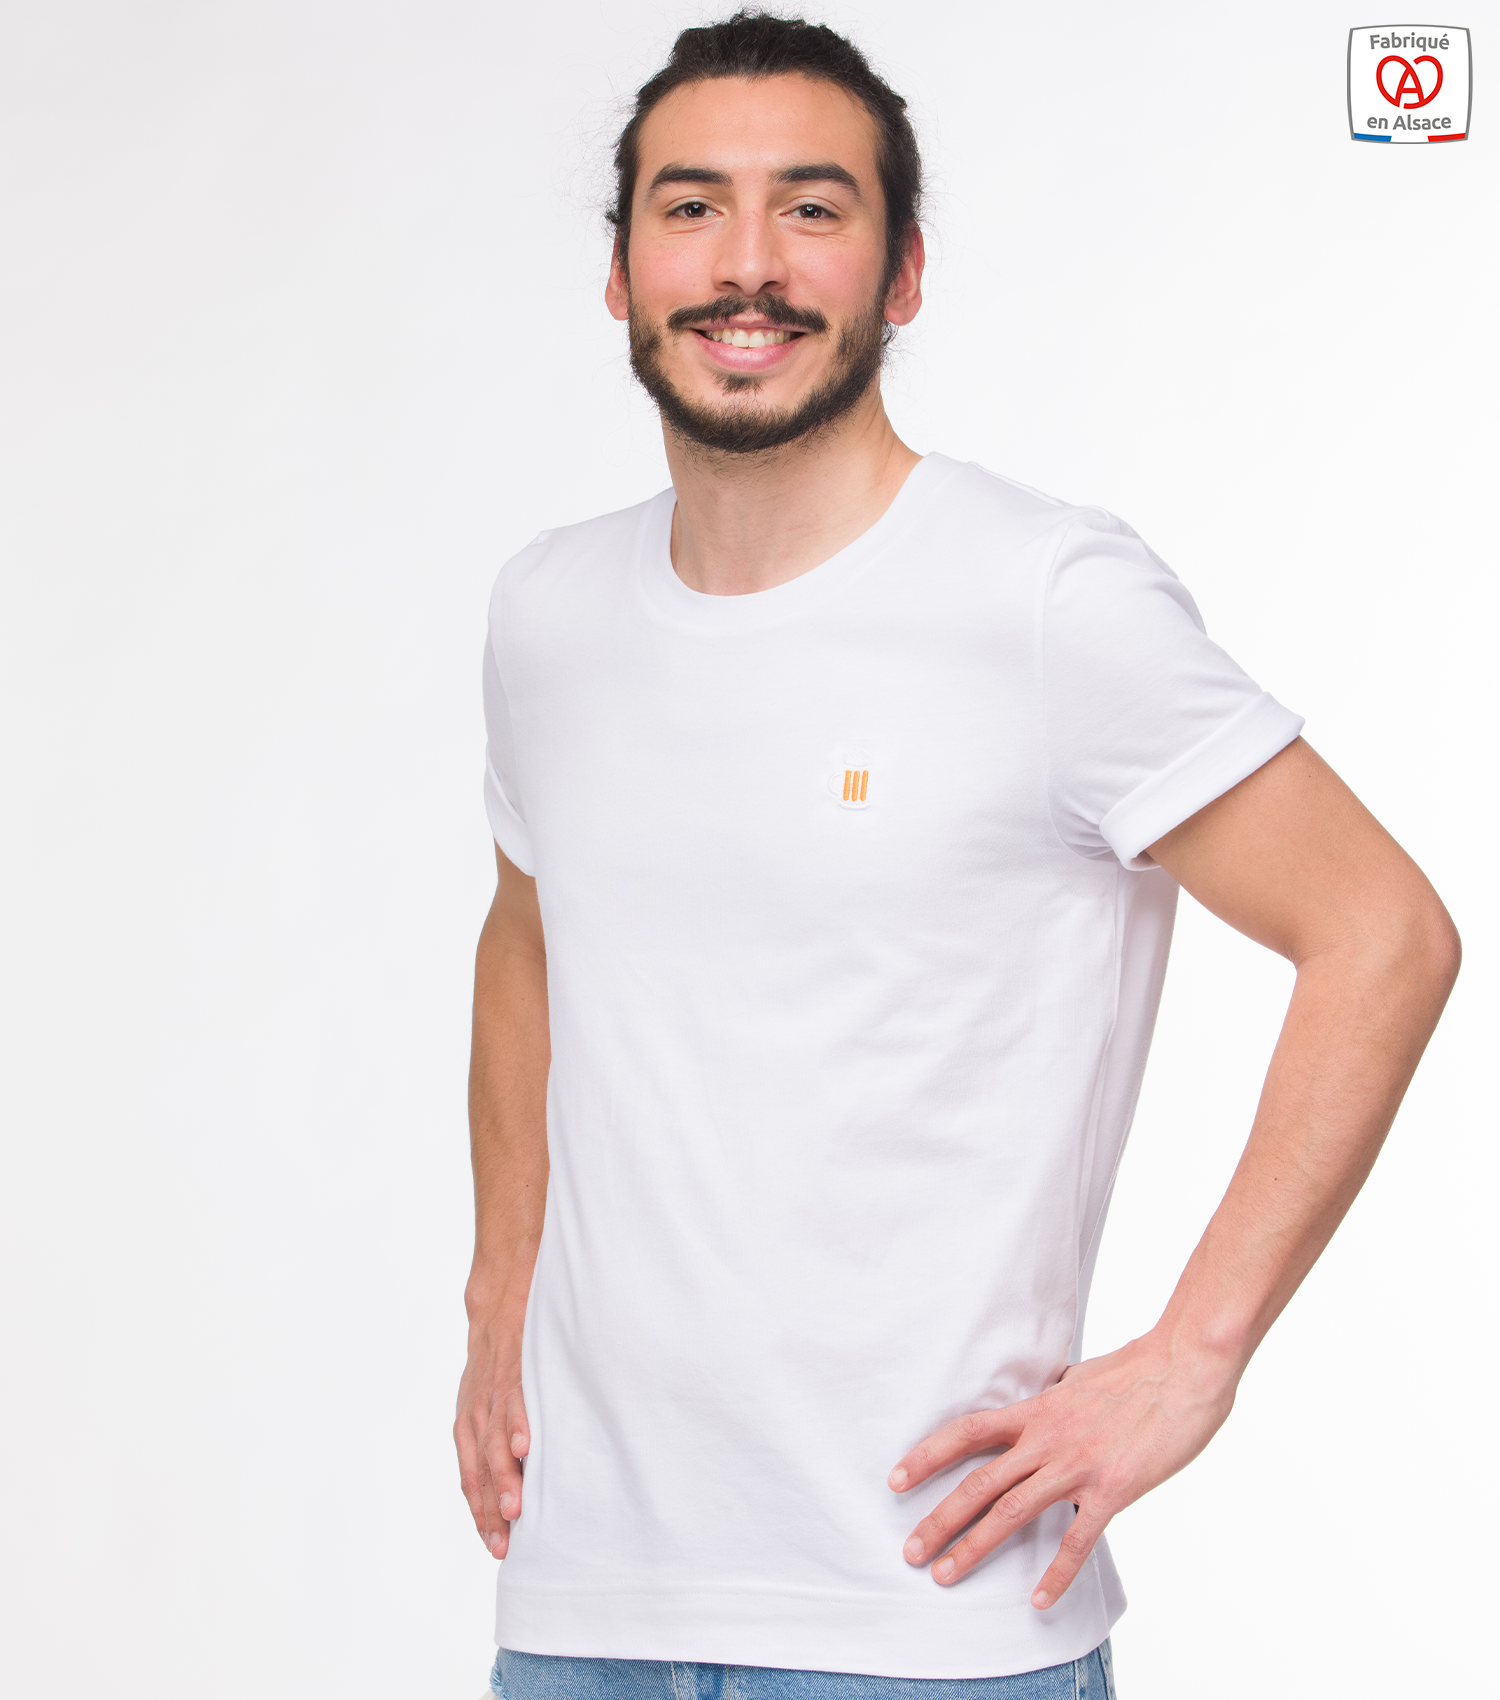 theim-t-shirt-made-in-france-mixte-blanc-biere-homme-1500-x-1700-px